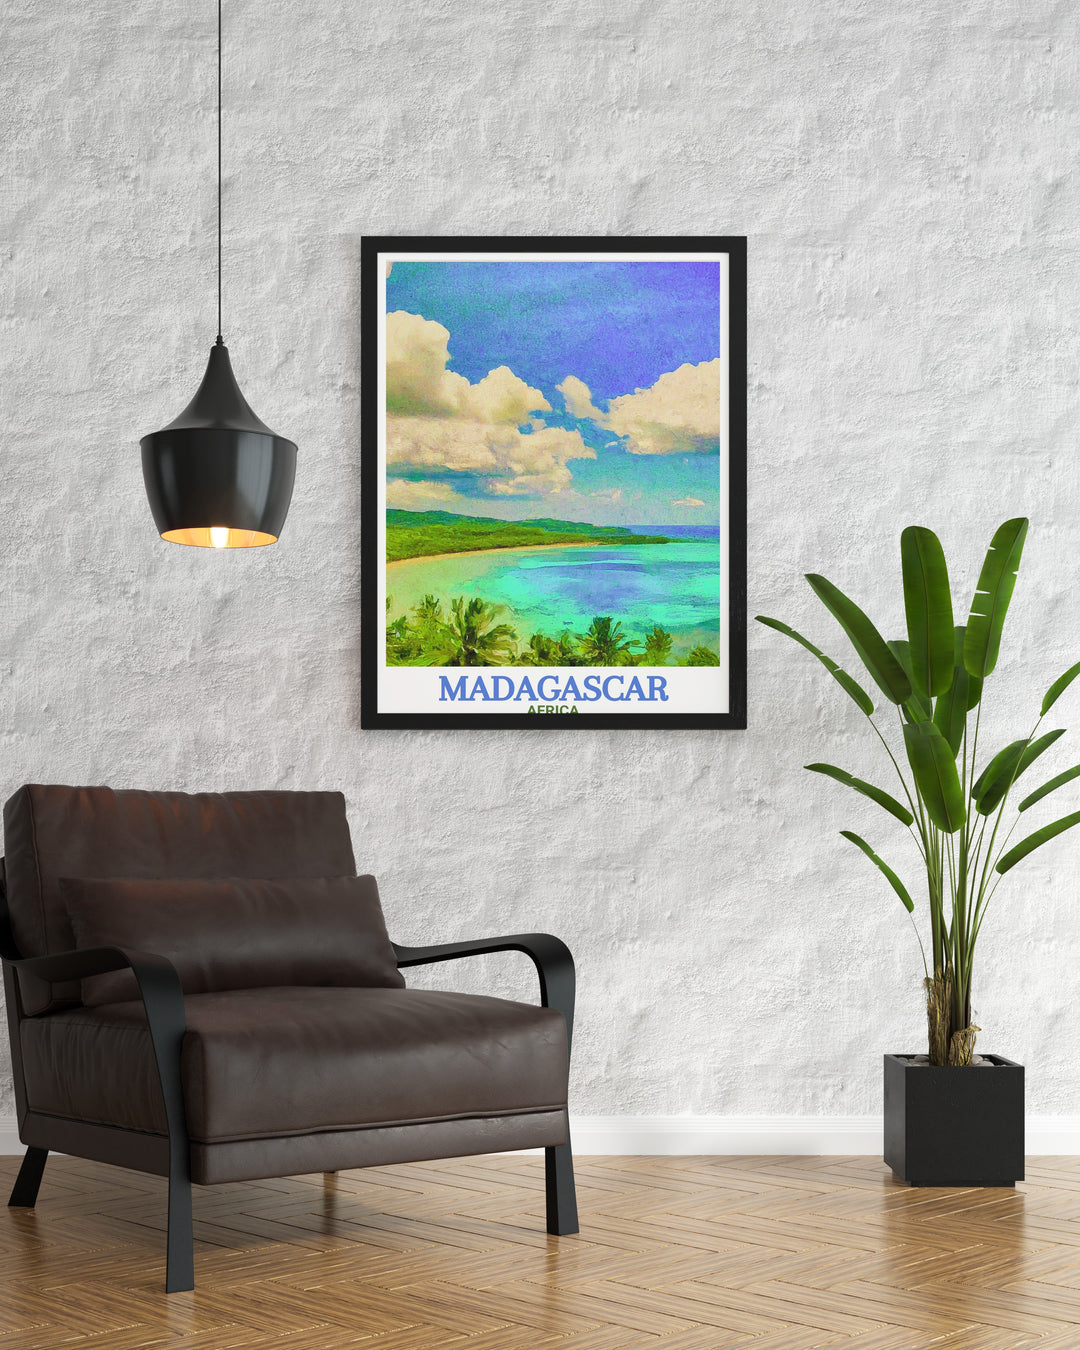 Nosy Be wall art featuring the tropical paradise of Madagascar perfect for Africa art enthusiasts and those who love unique wall decor adds a touch of adventure and elegance to any room ideal for gifts for dad or husband